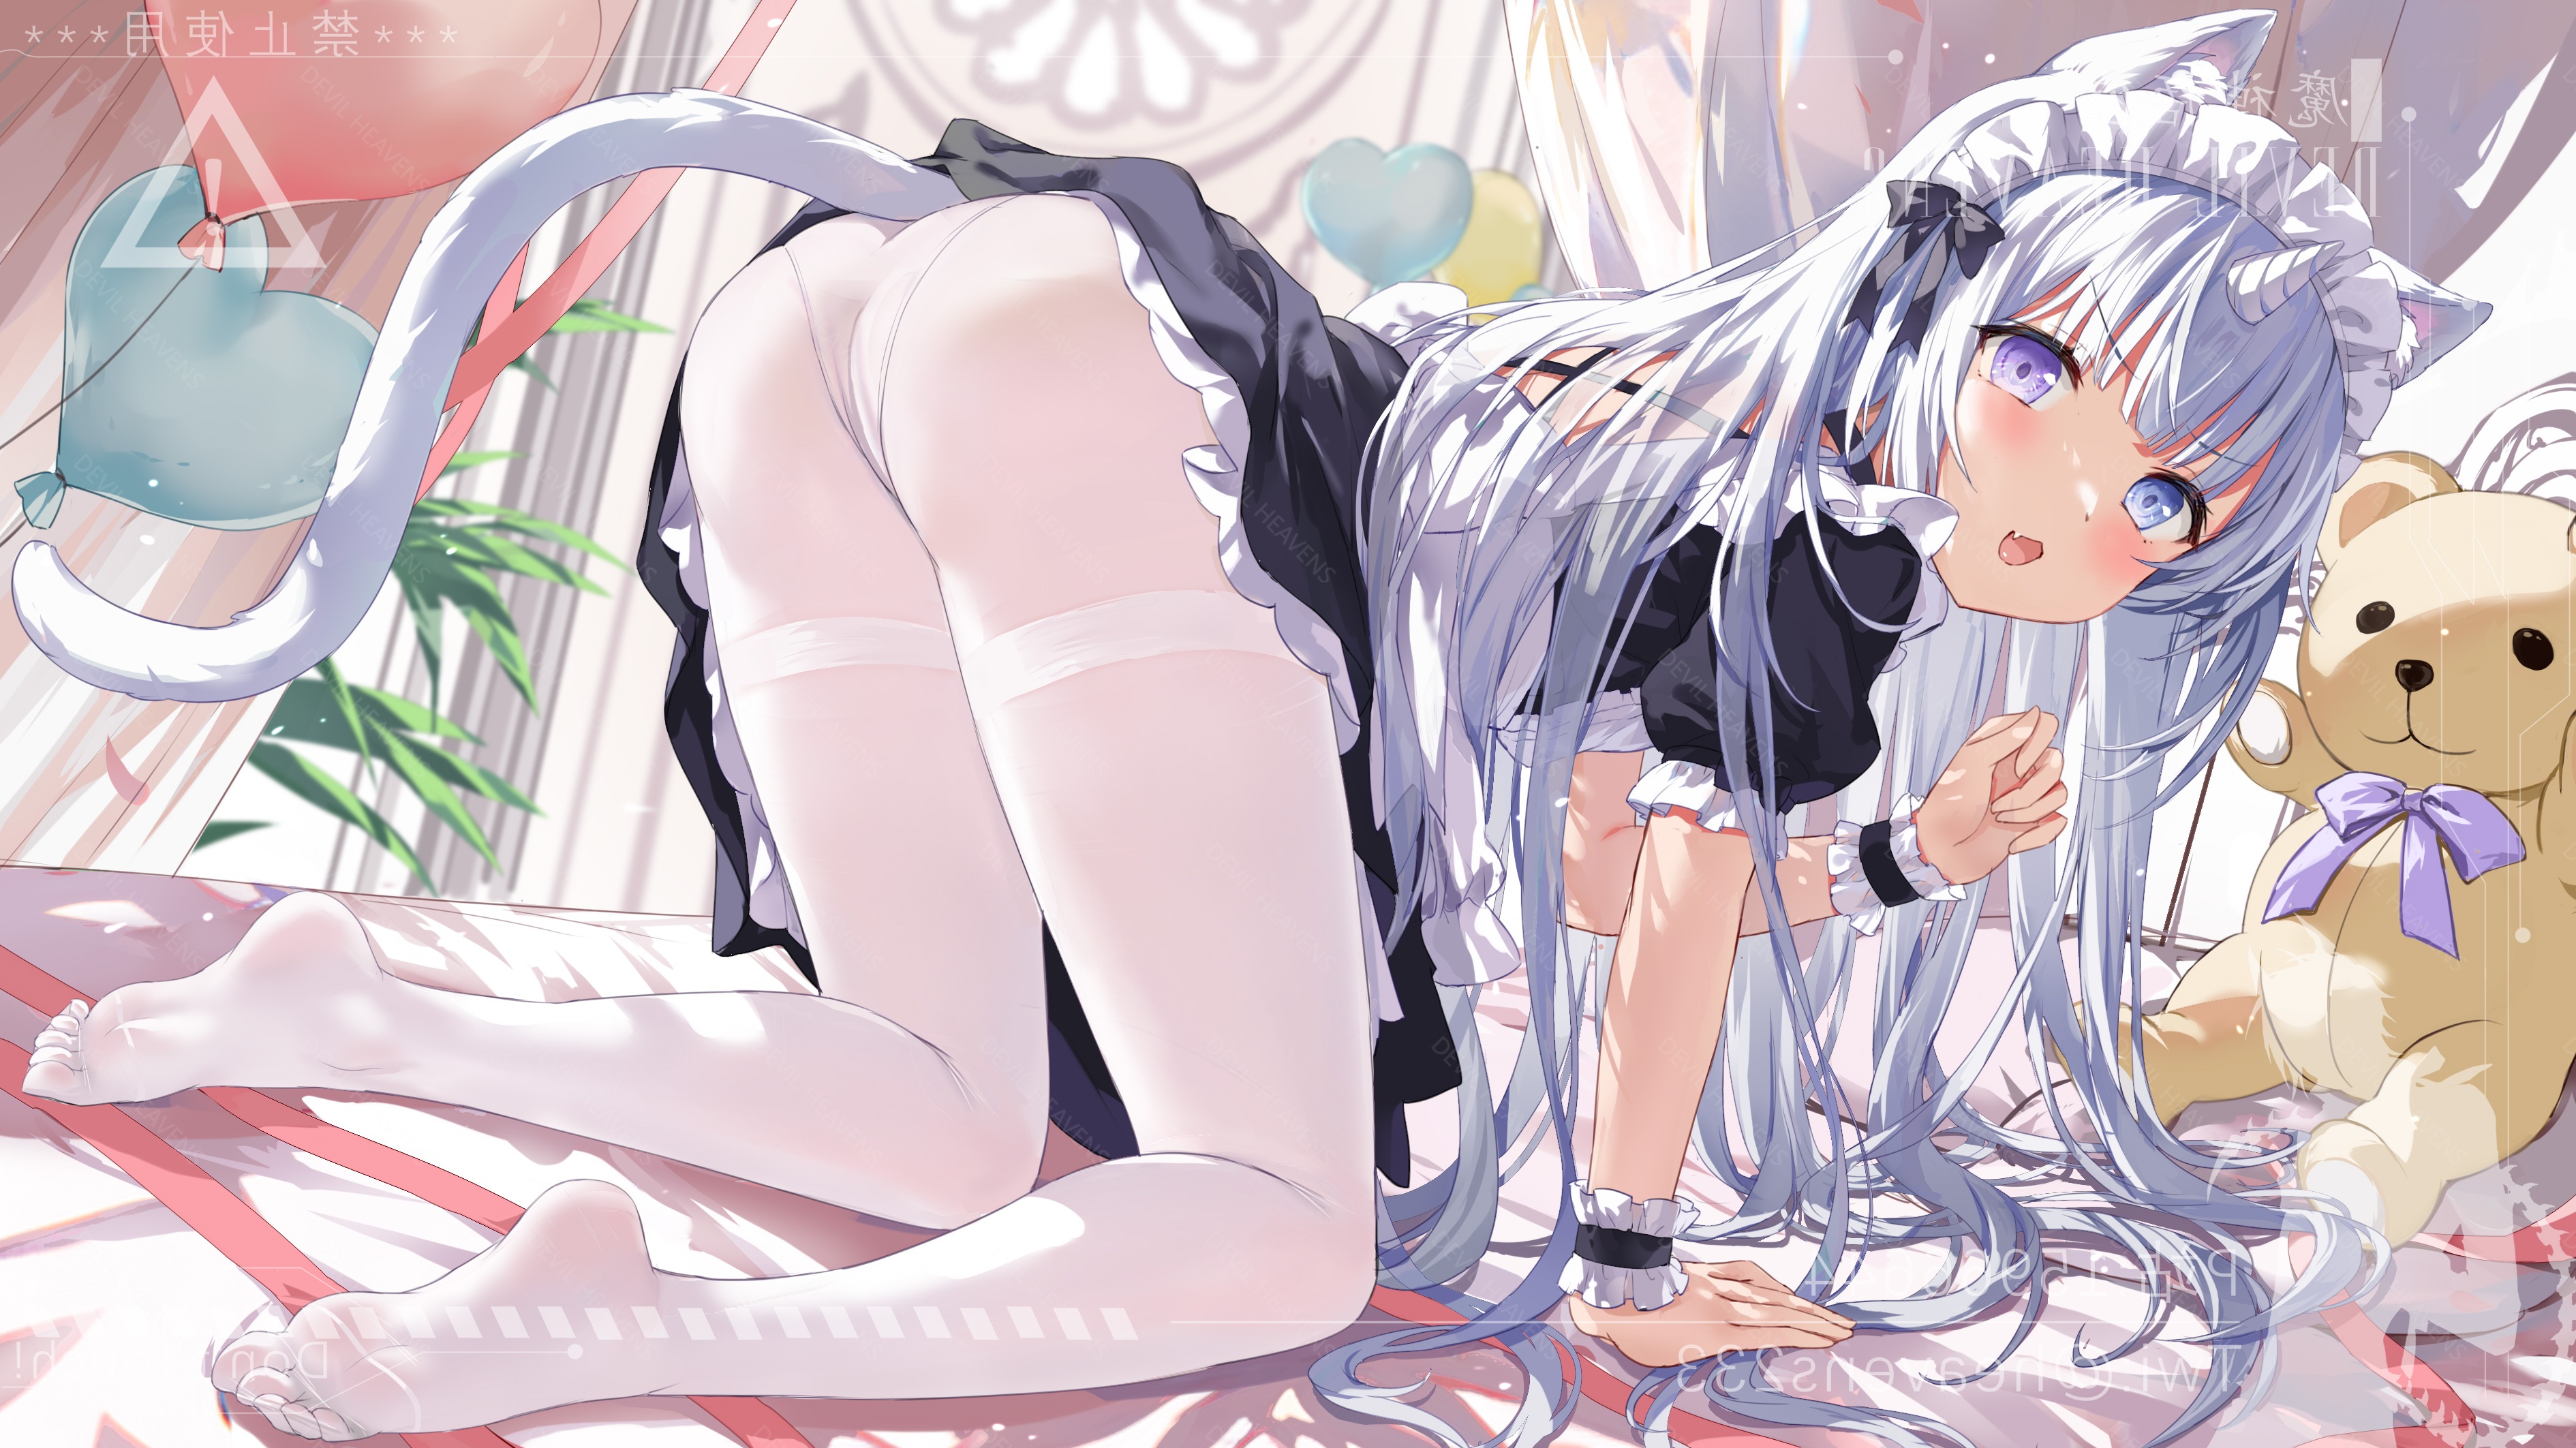 Anime 3780x2125 anime anime girls bent over maid maid outfit cat girl cat ears cat tail heterochromia blushing pantyhose ass teddy bears long hair panties bed petals balloon heart (design) loli Ninico (Vtuber) indie virtual youtuber Devil Heavens Virtual Youtuber